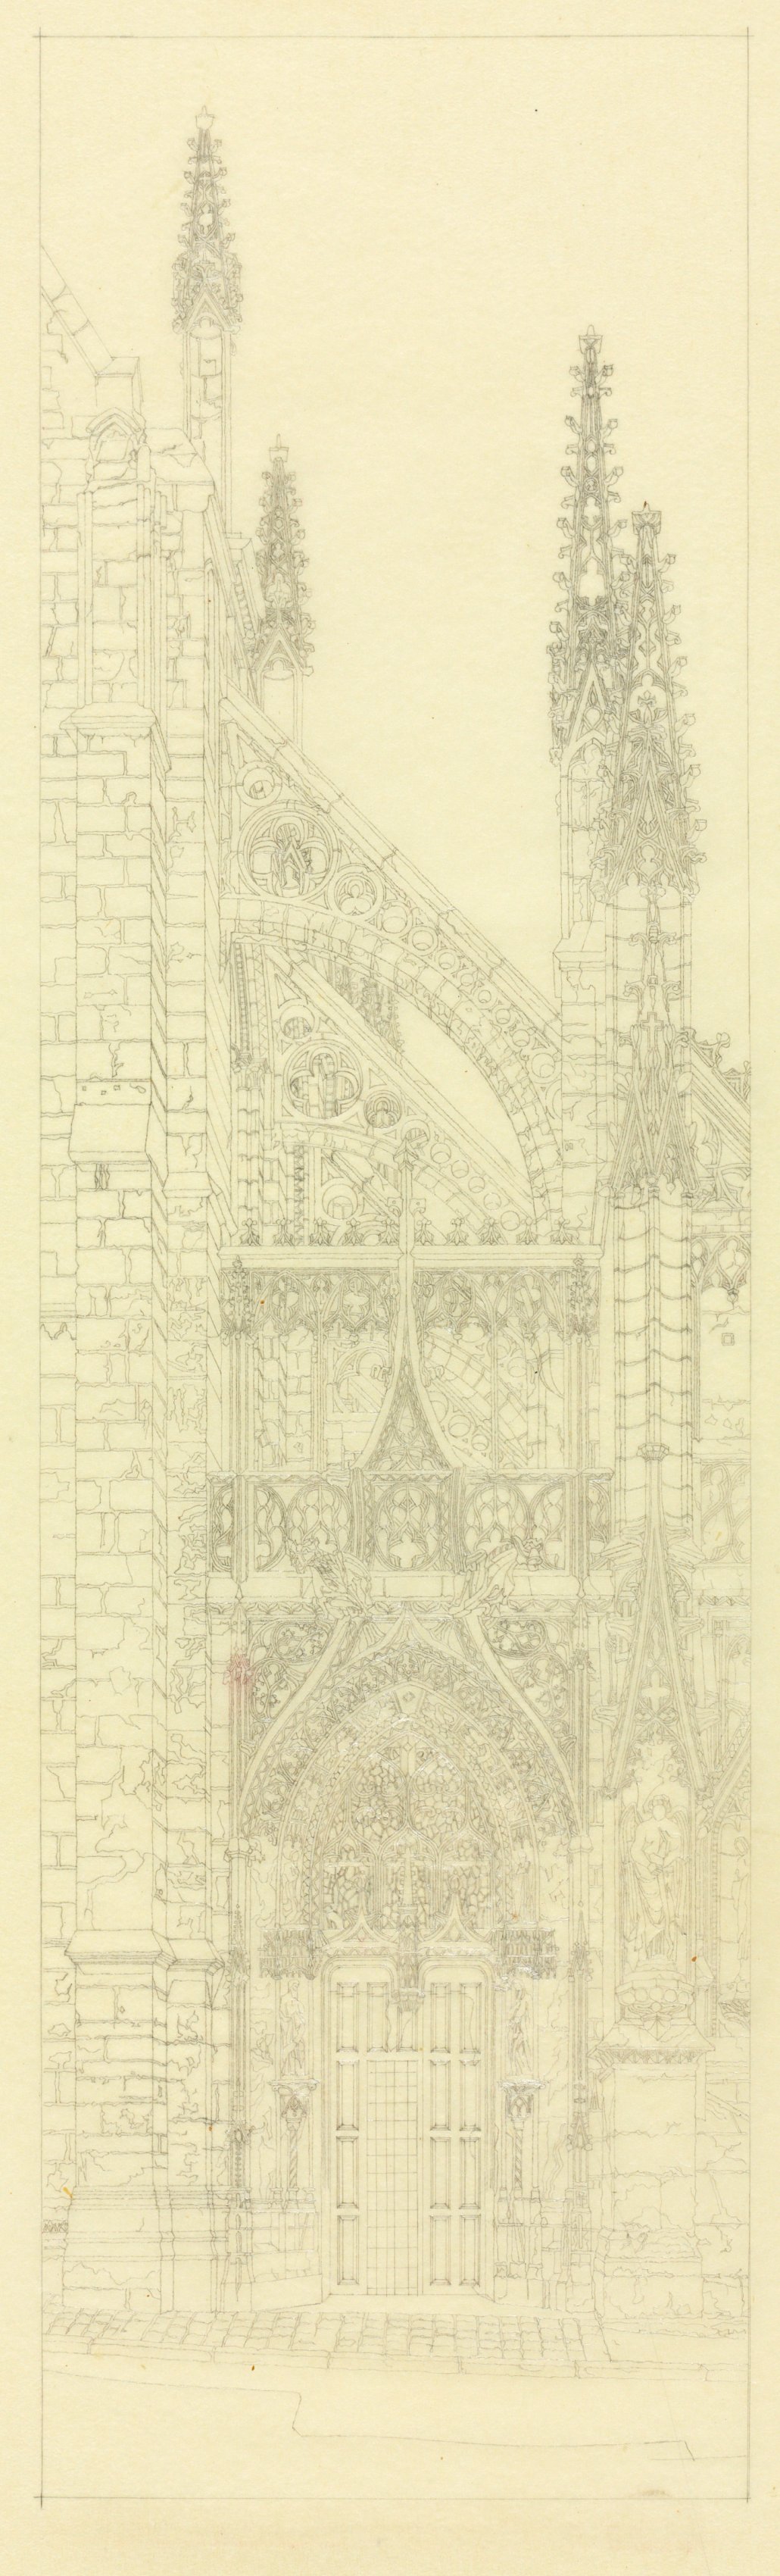 French Church Series No. 38: Louviers Lace